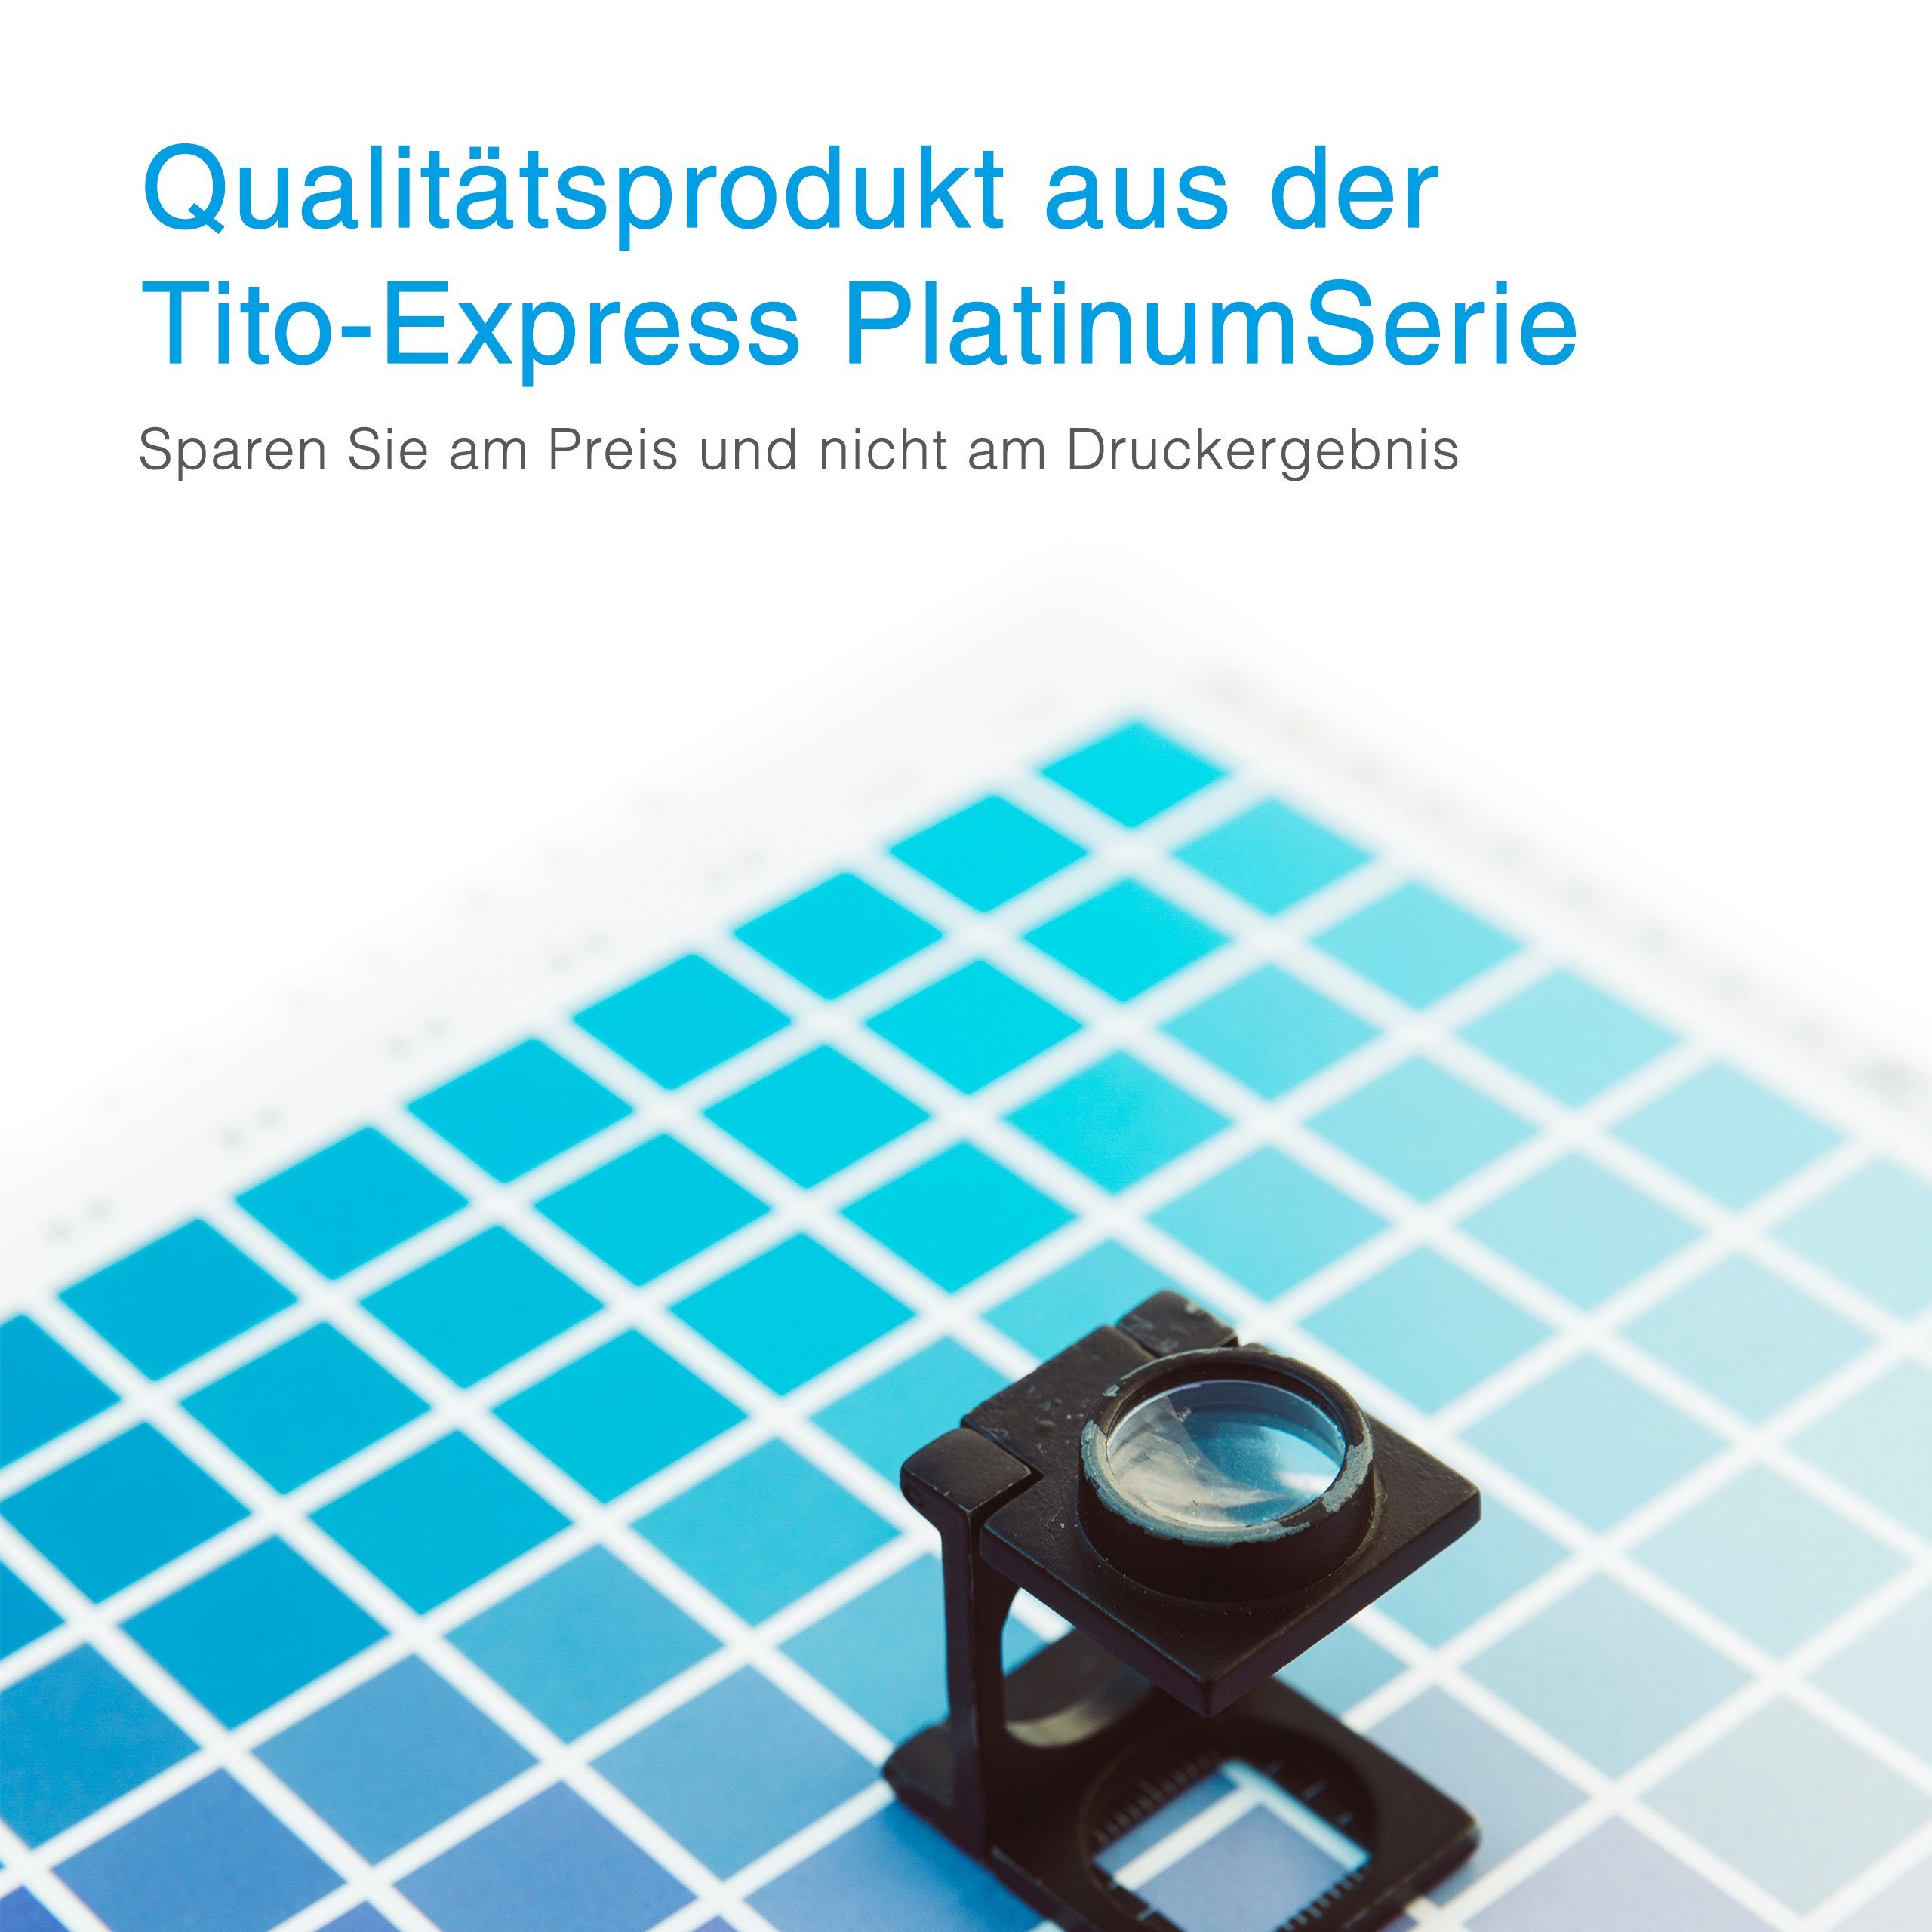 Tito-Express Tonerpatrone 5er 179fnw W2071A (Multipack, Magenta, Laser HP 178nw Color 2x ersetzt 117A, W2073A 1x MFP-170 HP MFP 150nw 1x 178nwg 150a 179fwg Black, W2070A Cyan, Set W2072A 1x für Yellow)